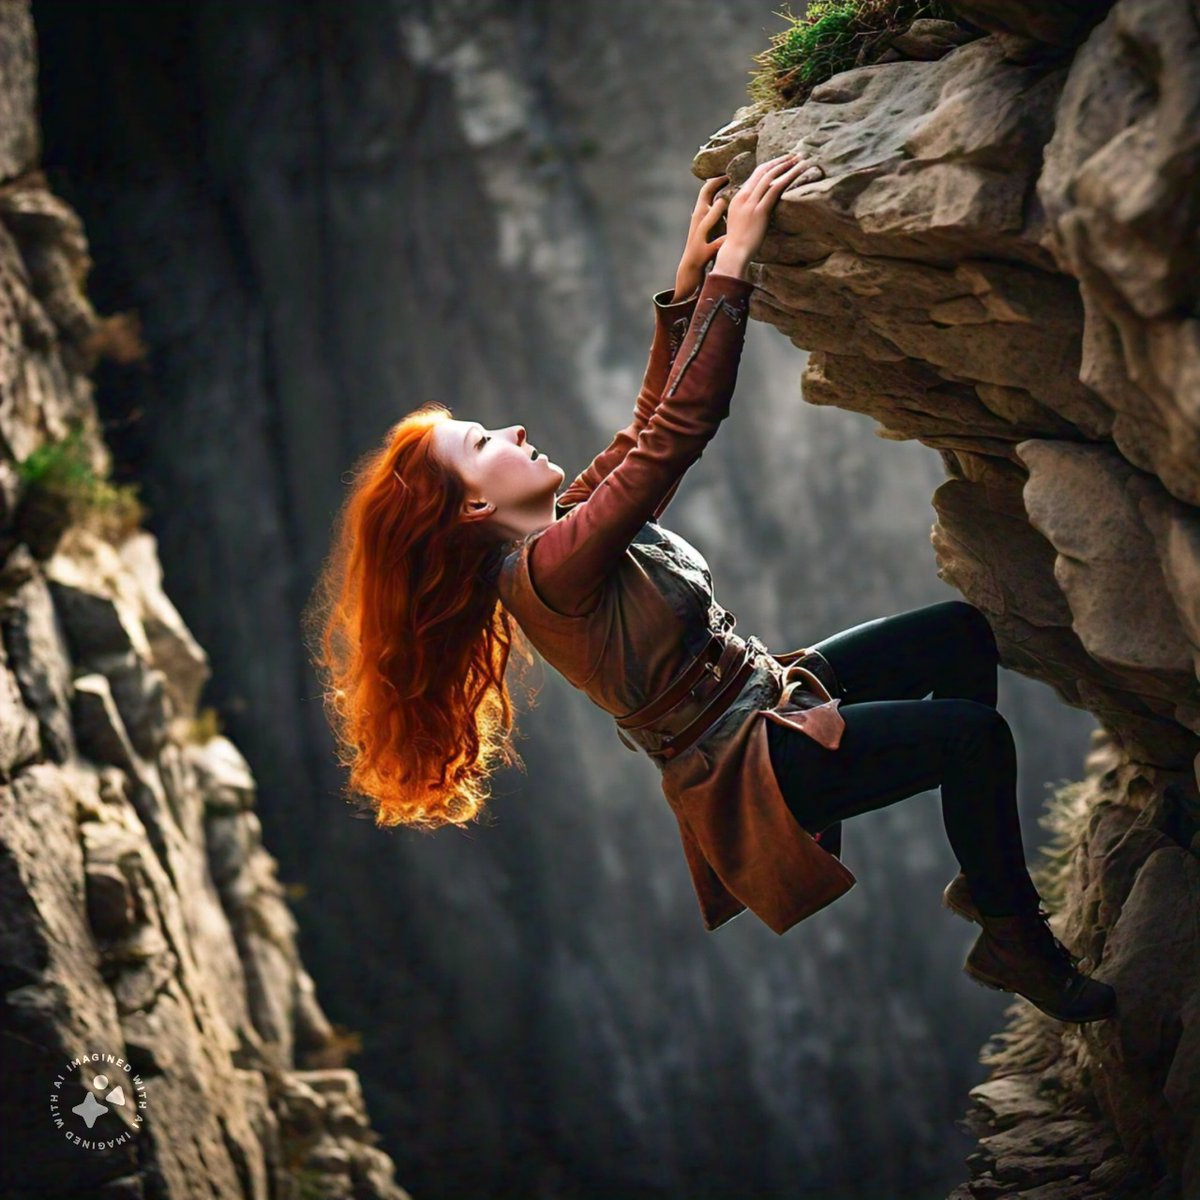 I'm FRUSTRATED woman, hanging off the cliff, hoping 4 evolution in women's below-the-waist health. Yrs of chasing media 2 open the floodgate on POP reality with little response. CHANGE IS  COMING!

#APOPS #EveryVoiceMatters #womenshealthempowerment #TheBiggestSecretinWomensHealth